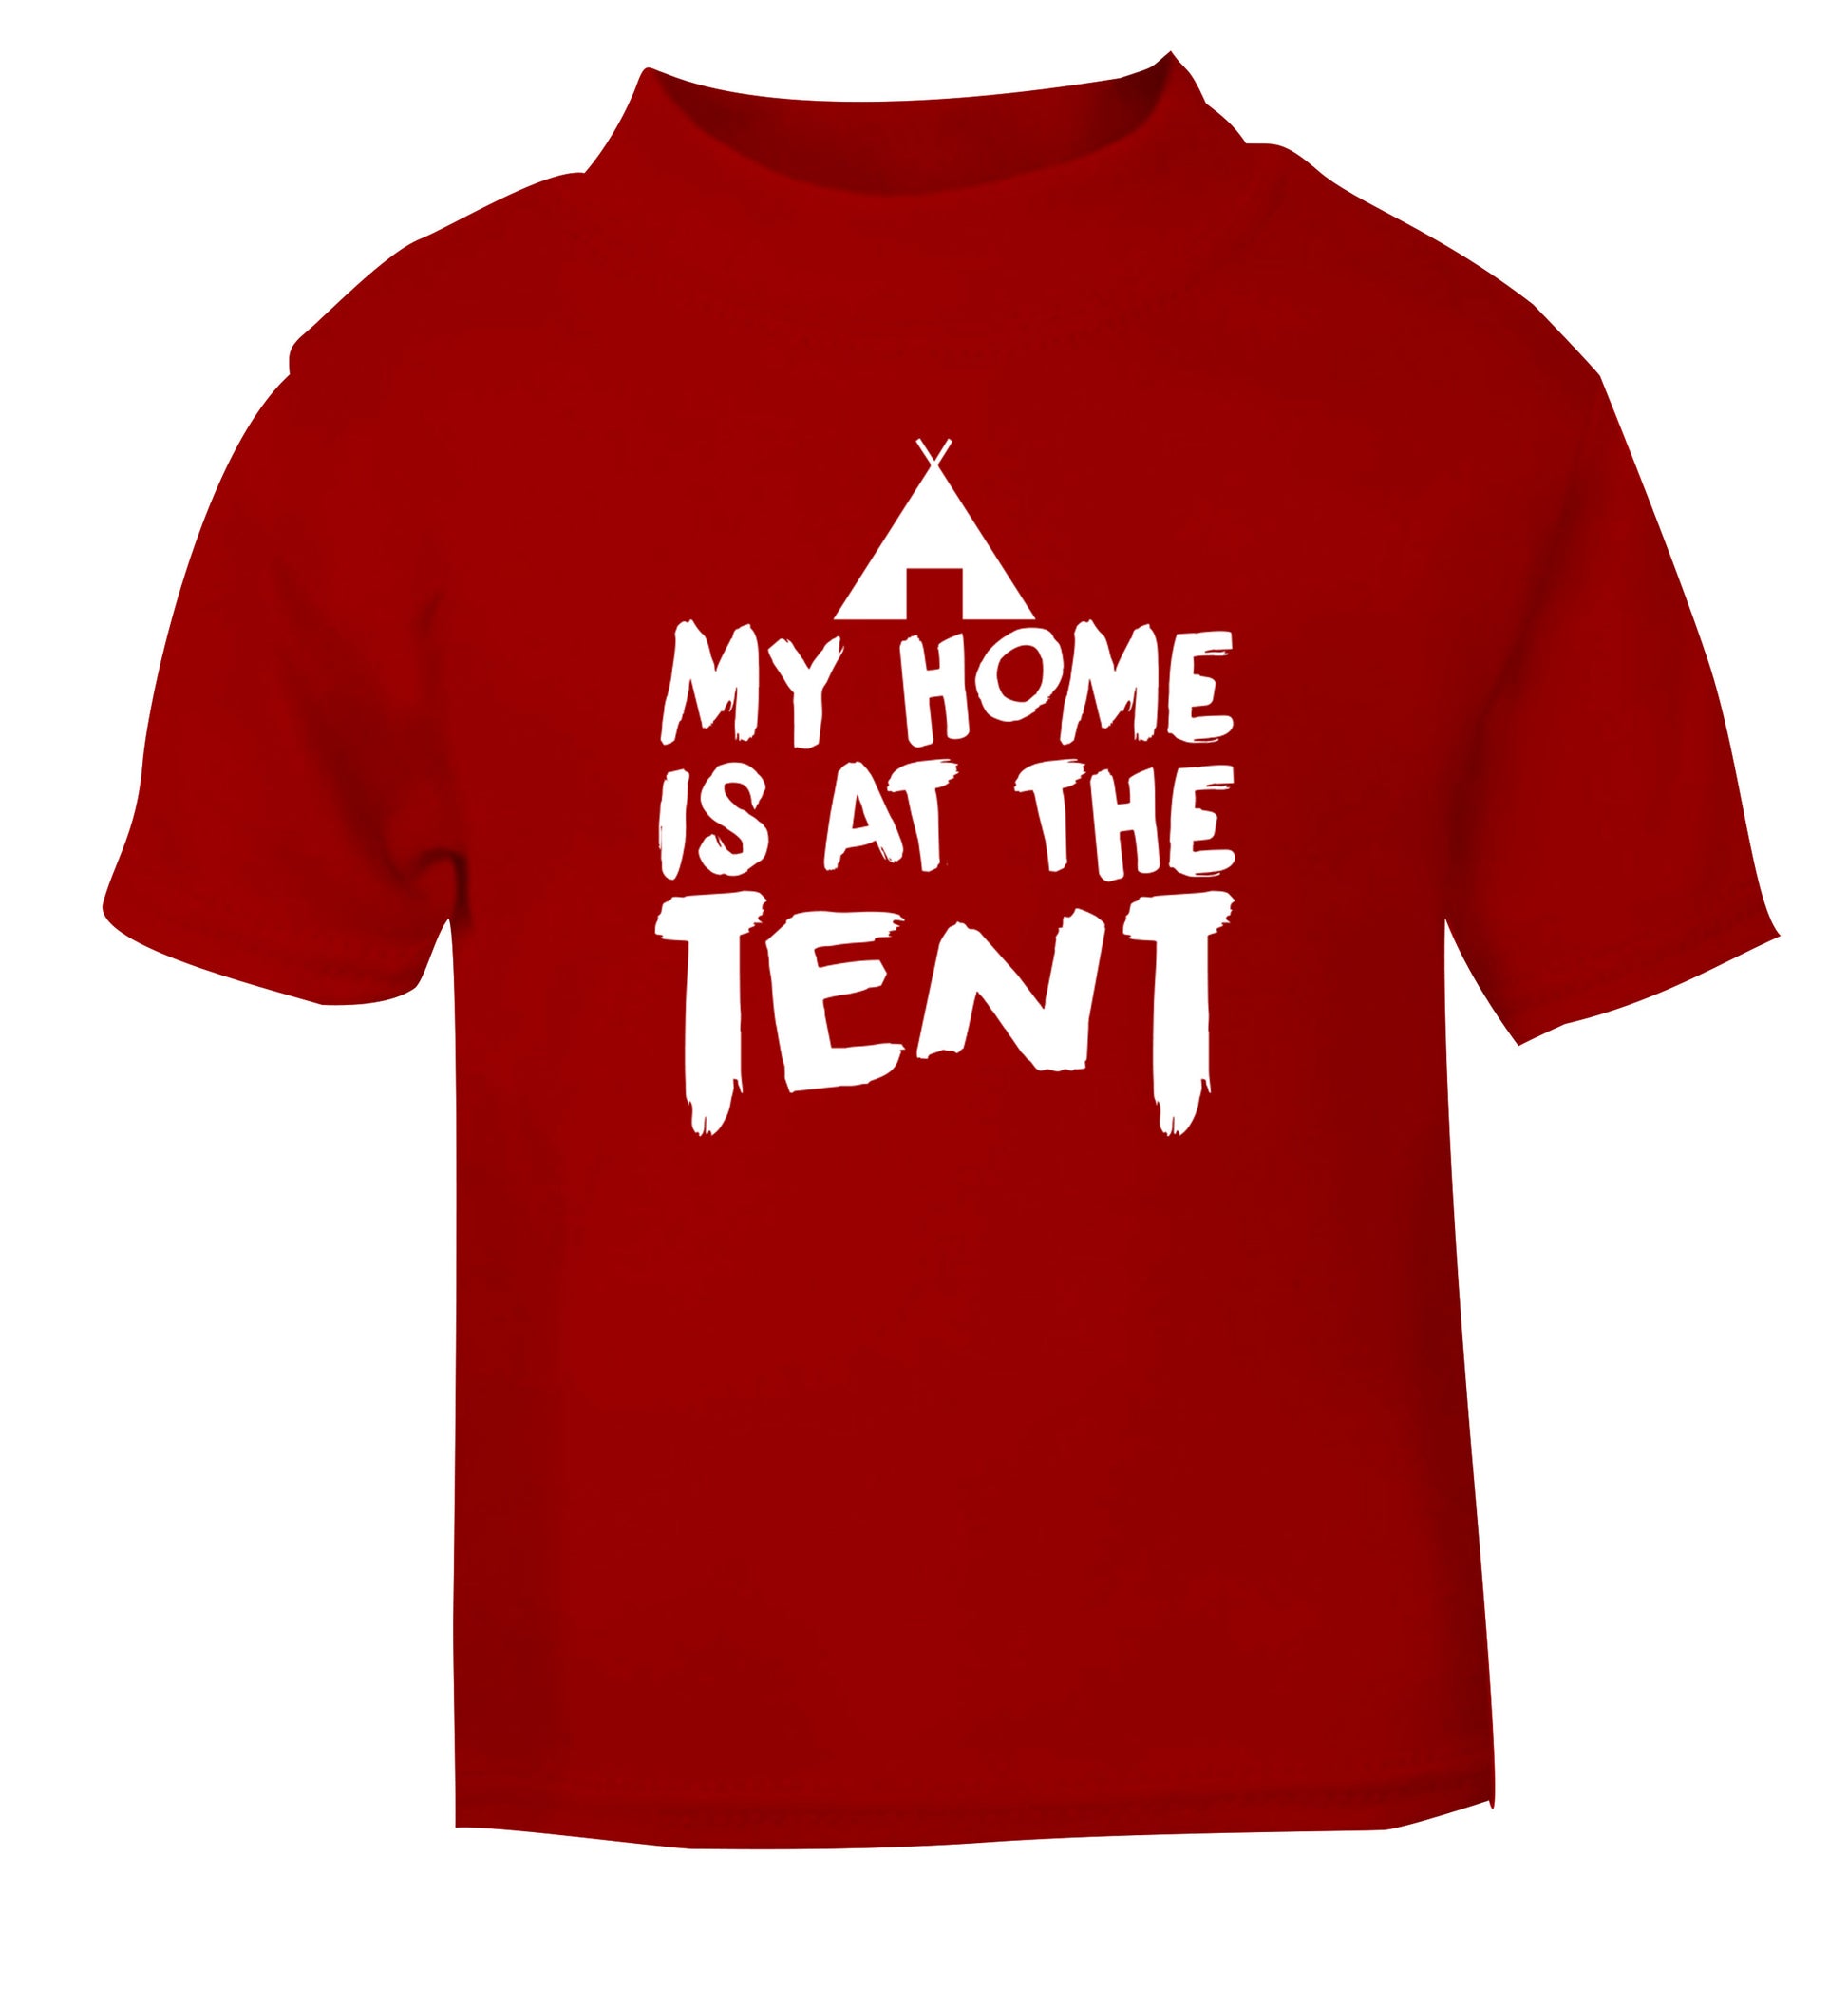 My home is at the tent red Baby Toddler Tshirt 2 Years